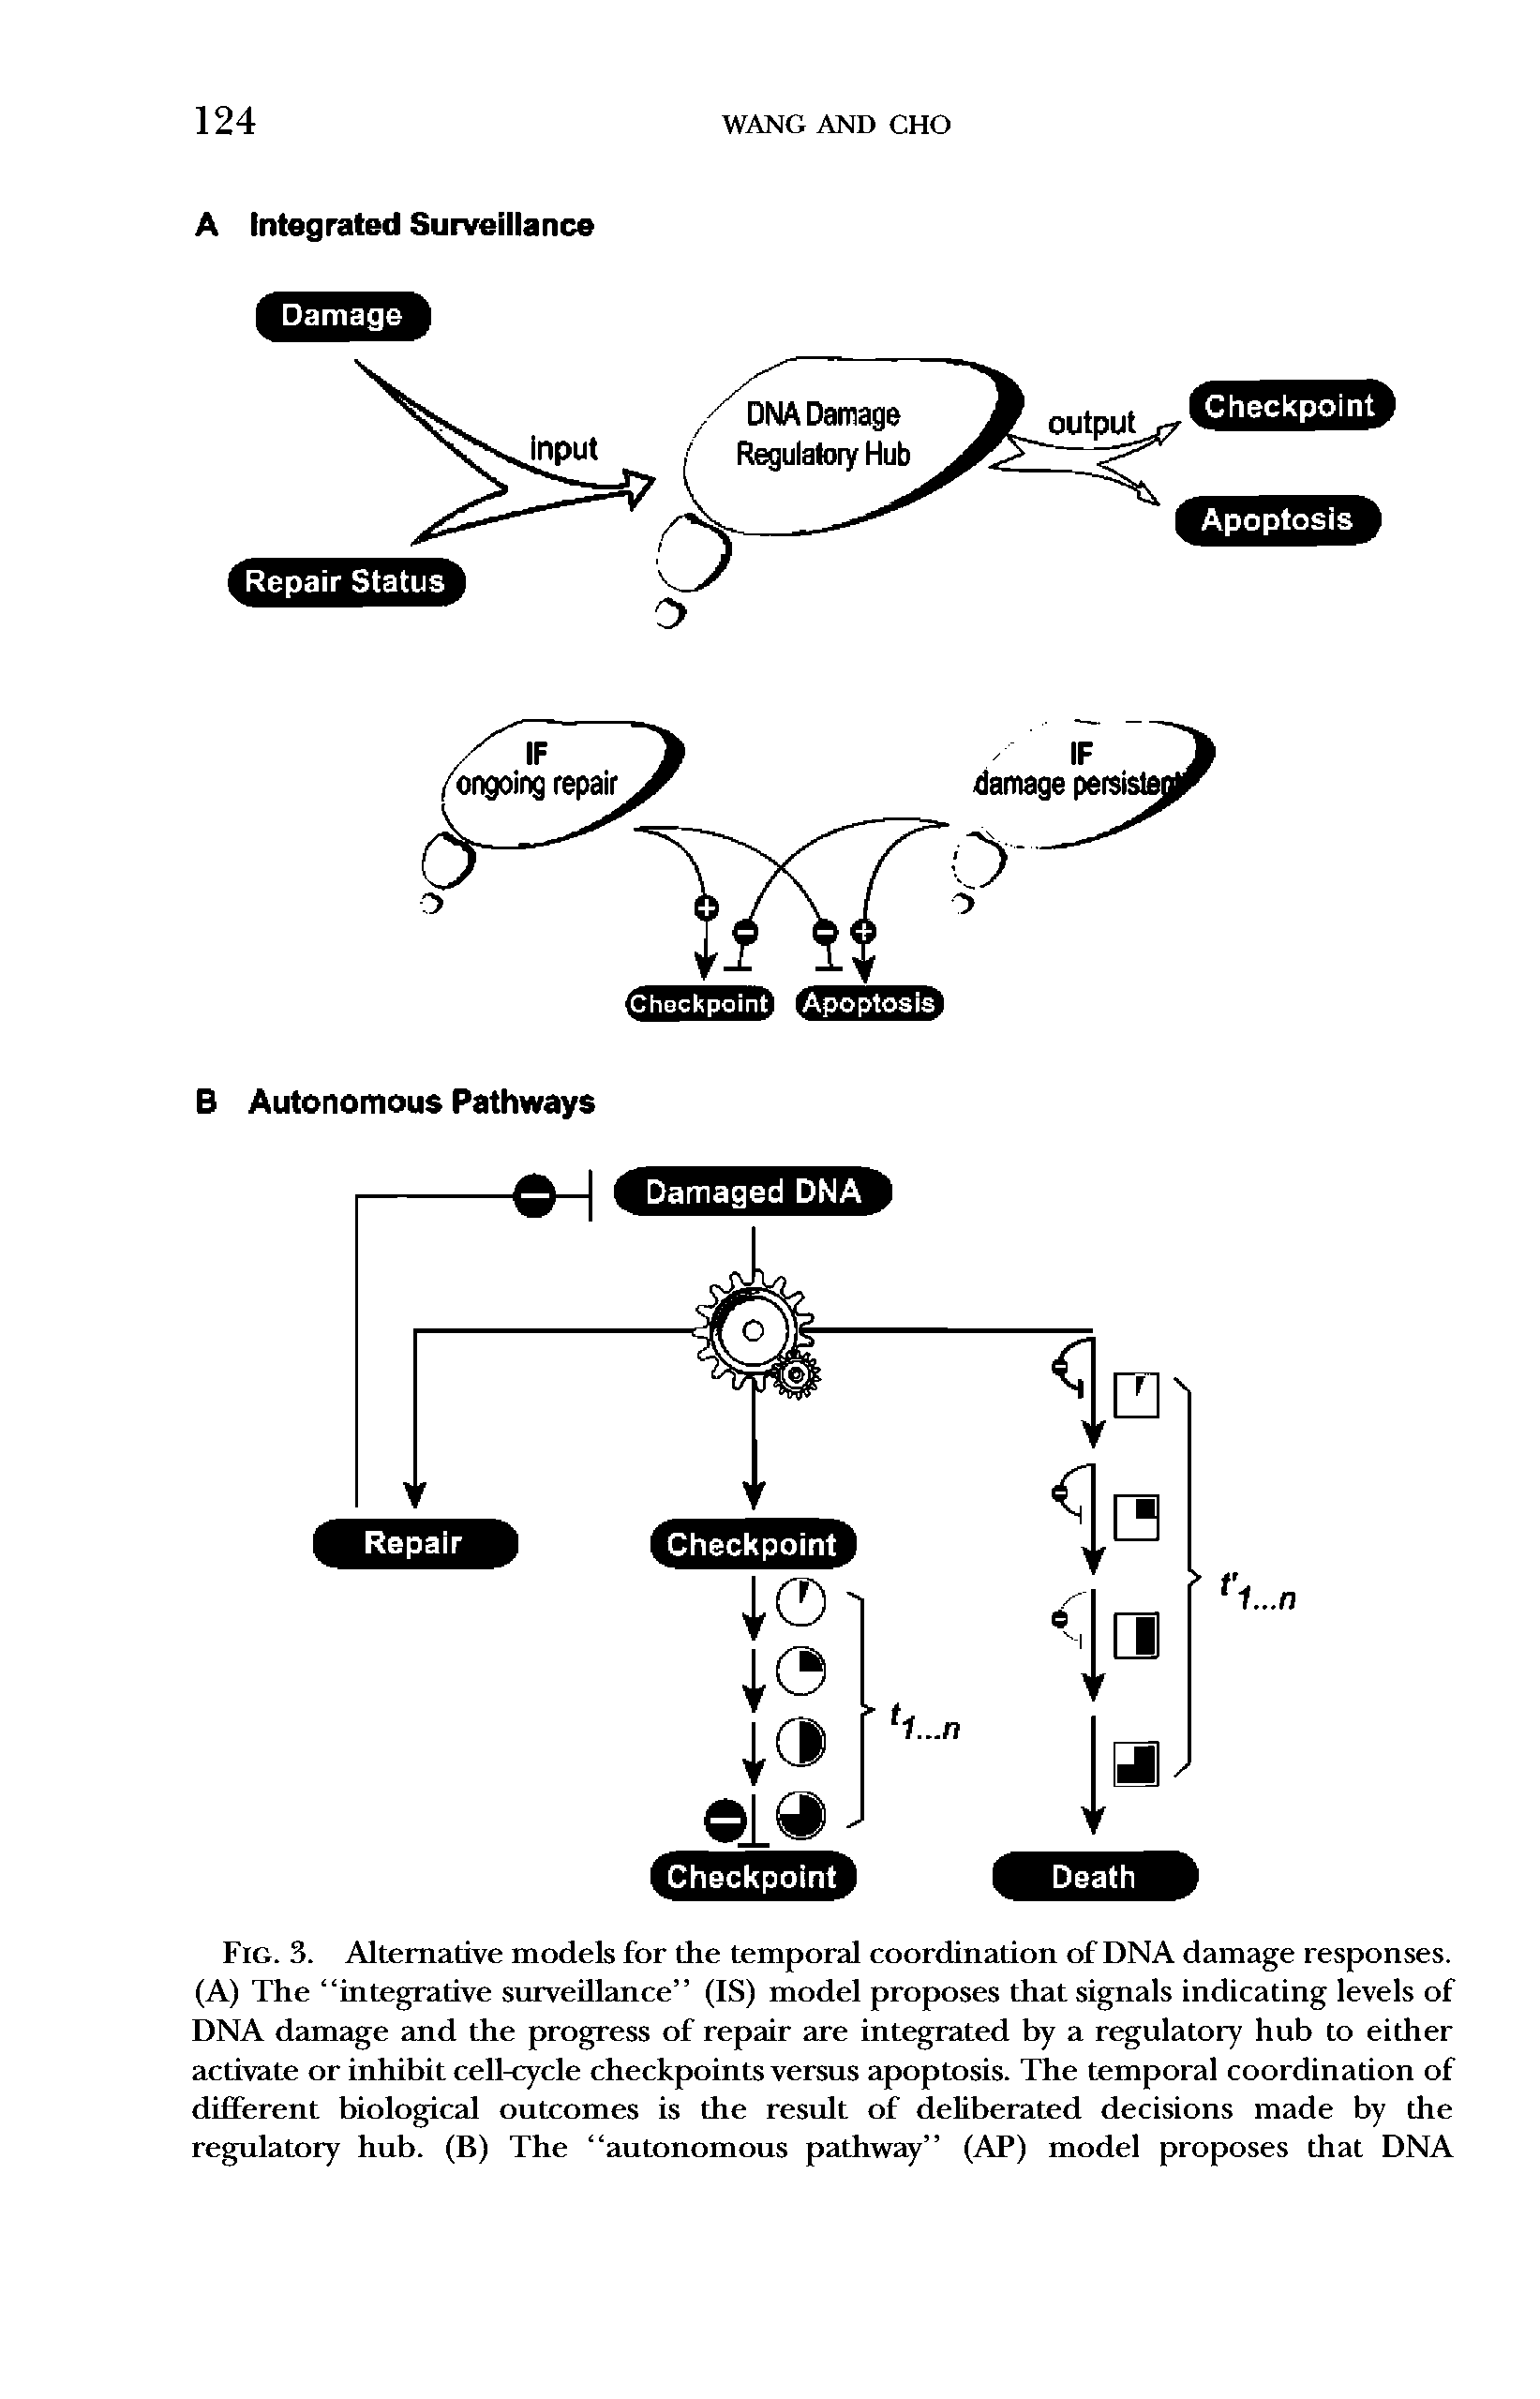 Fig. 3. Alternative models for the temporal coordination of DNA damage responses. (A) The integrative surveillance (IS) model proposes that signals indicating levels of DNA damage and the progress of repair are integrated by a regulatory hub to either activate or inhibit cell-cycle checkpoints versus apoptosis. The temporal coordination of different biological outcomes is the result of deliberated decisions made by the regulatory hub. (B) The autonomous pathway (AP) model proposes that DNA...